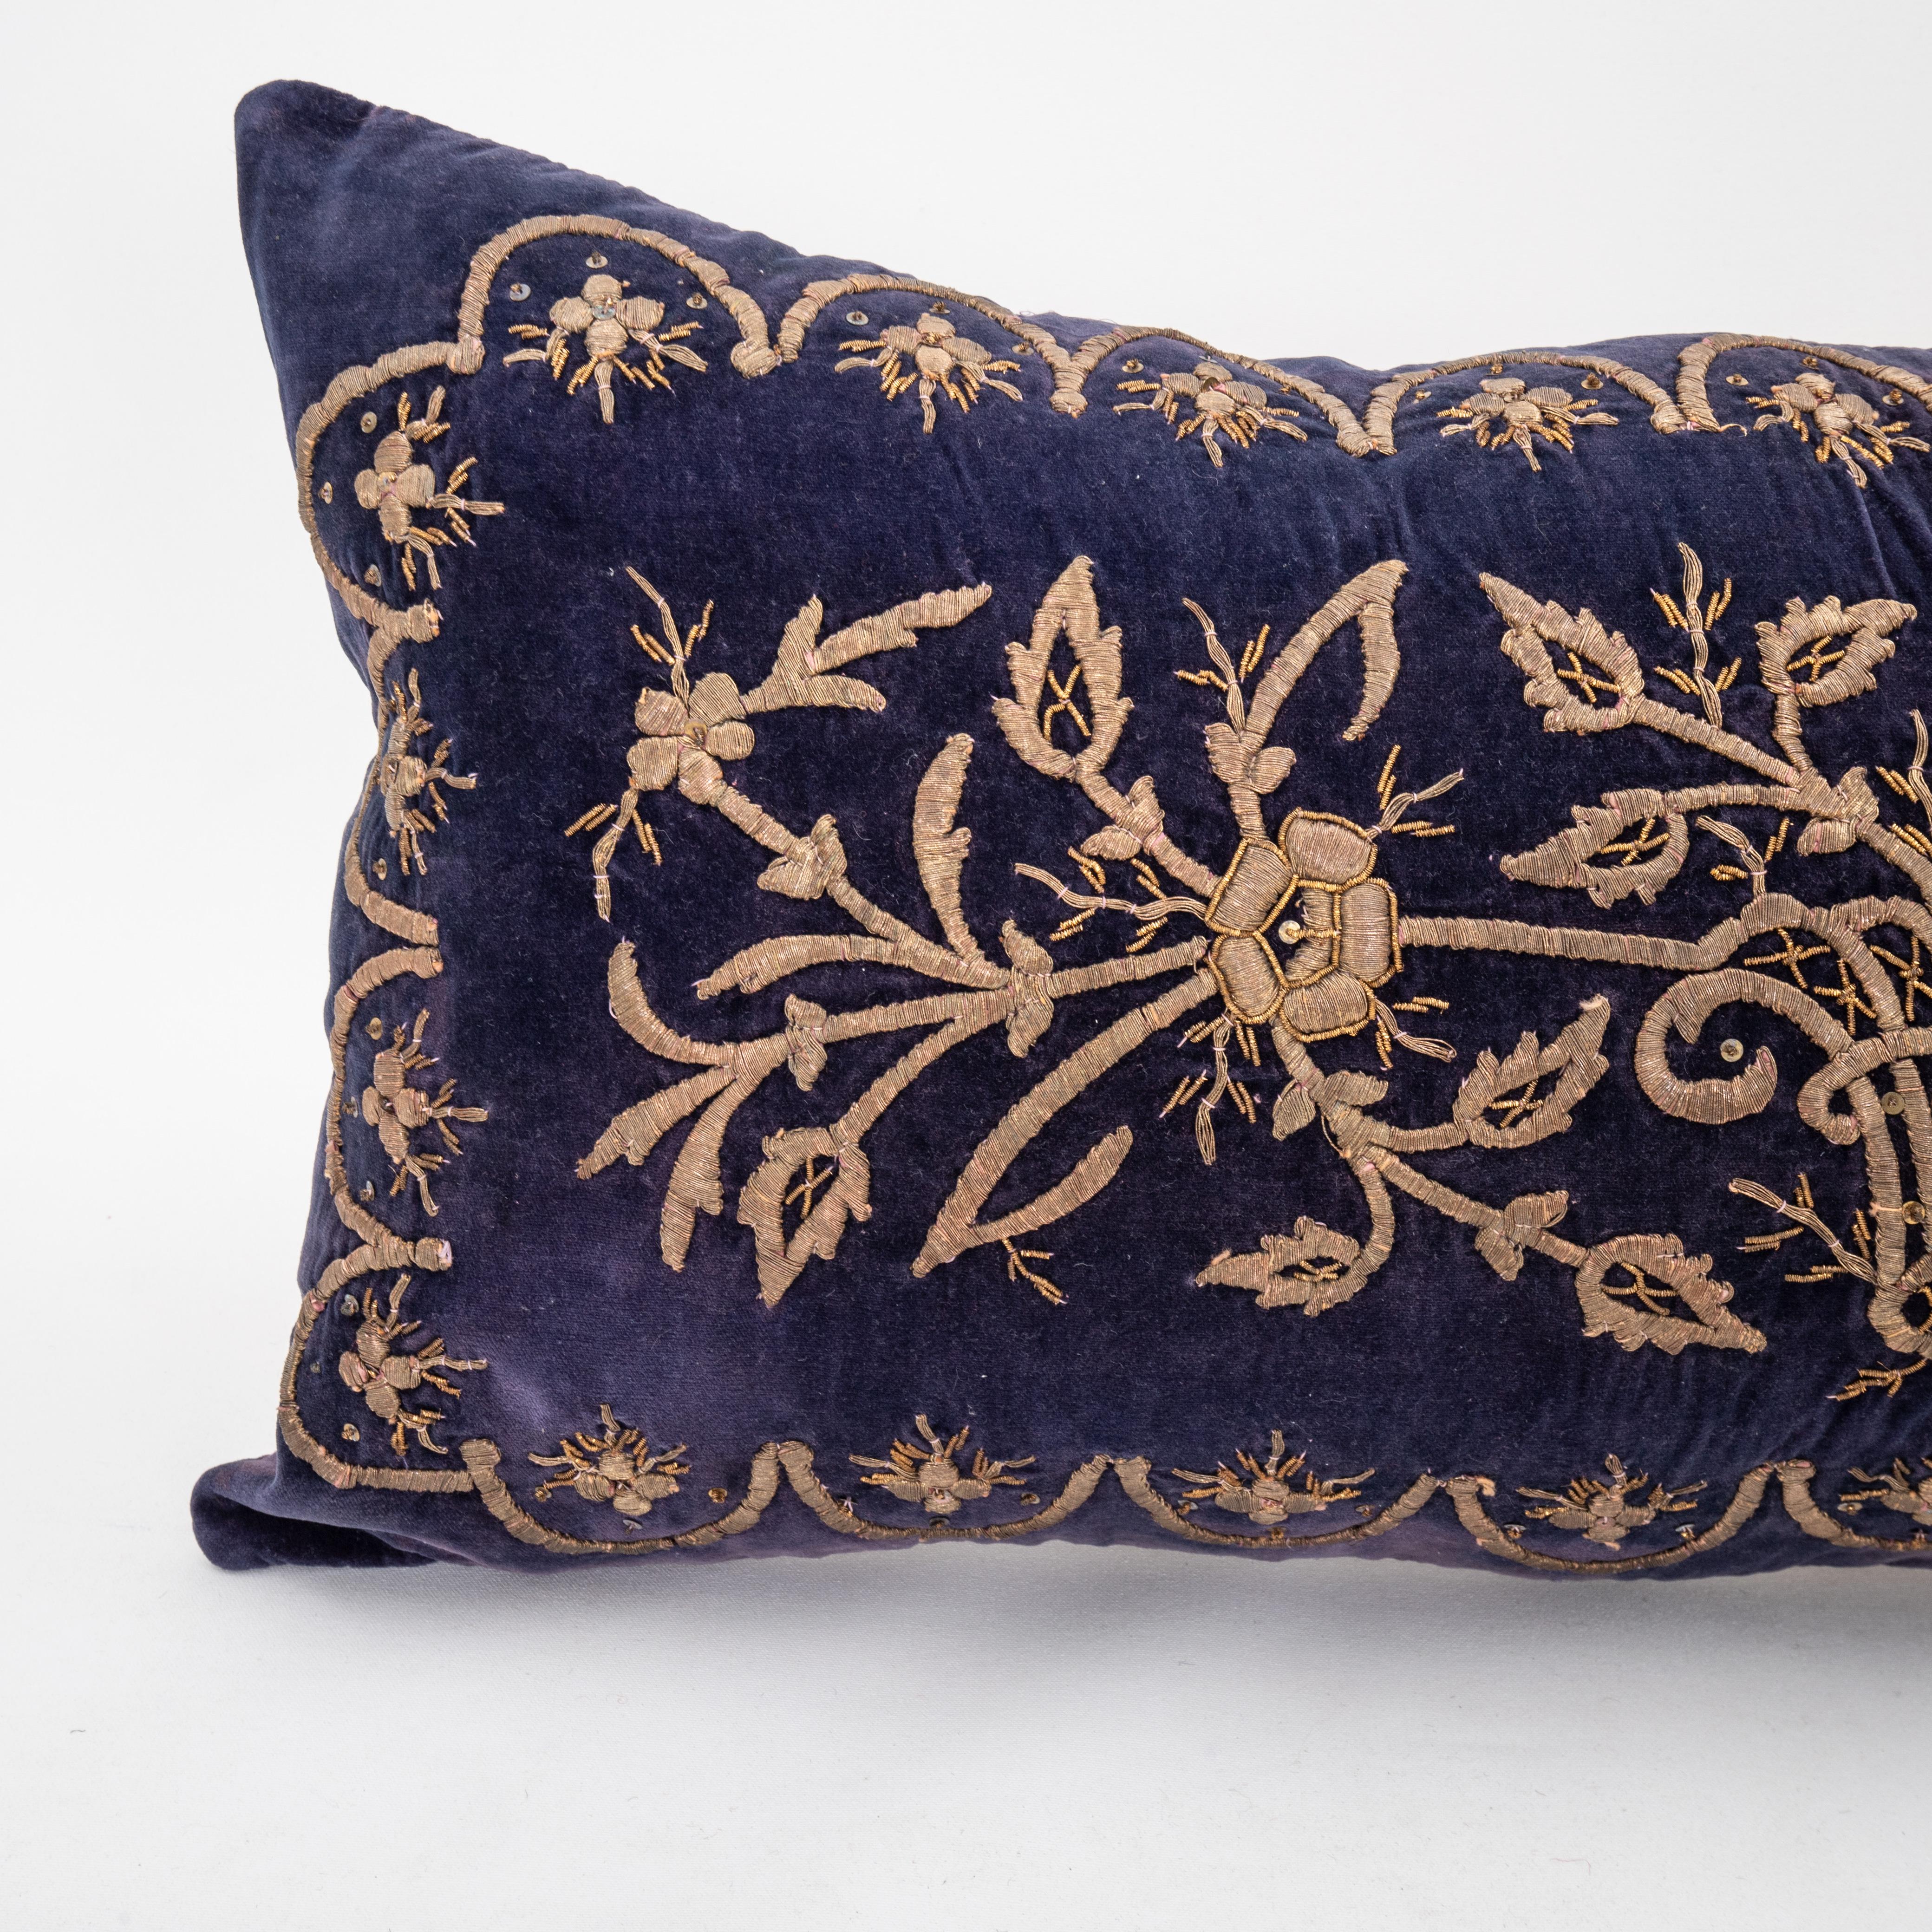 Embroidered Ottoman / Turkish Pillow Cover in Sarma Technique, late 19th / Early 20th C. For Sale